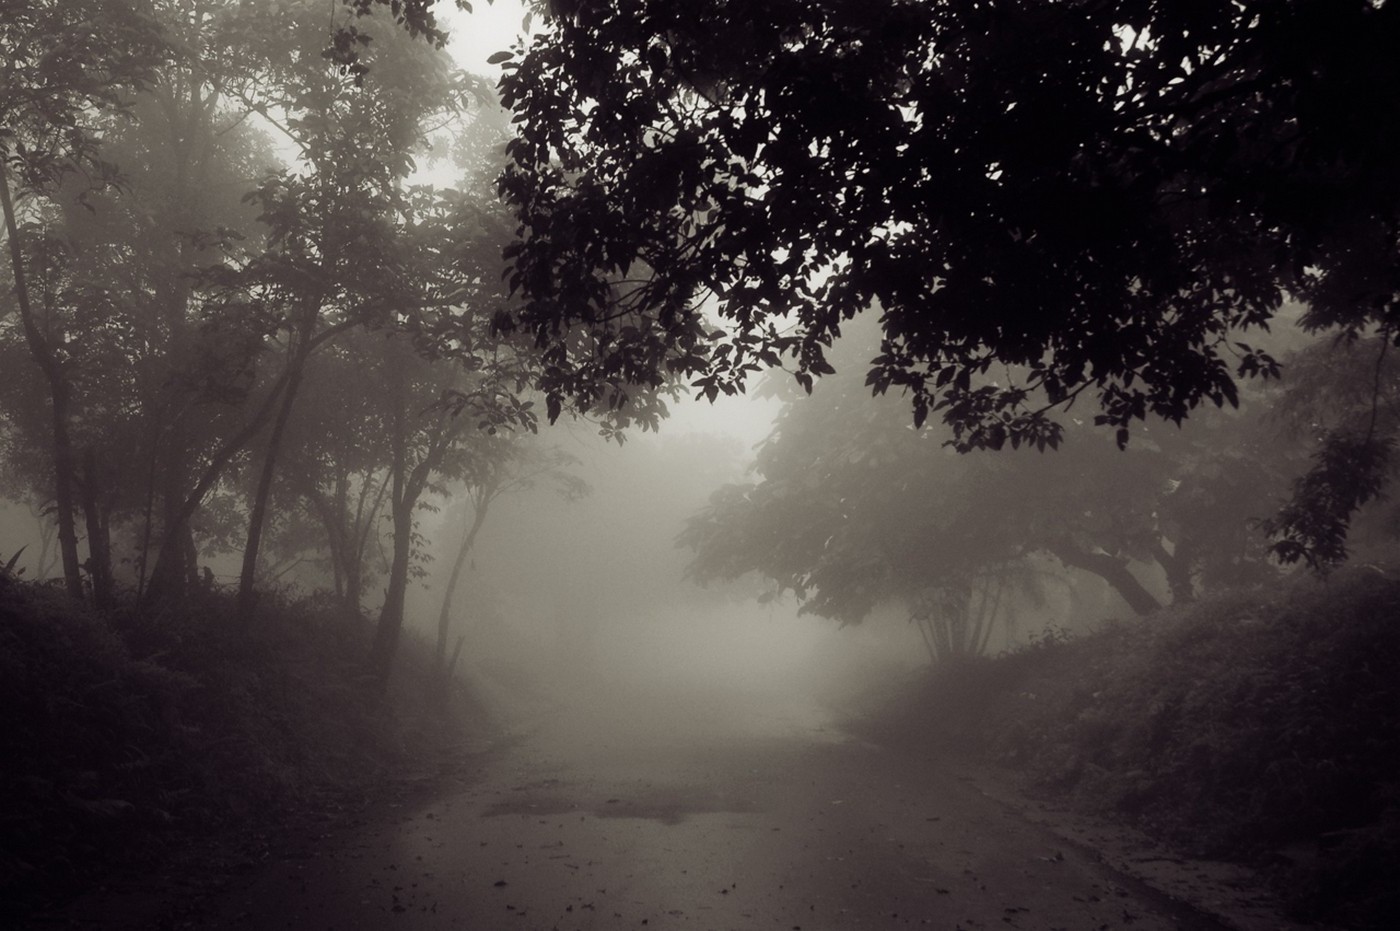 photography, Nature, Landscape, Mist, Road, Morning, Trees, Atmosphere, Daylight Wallpaper